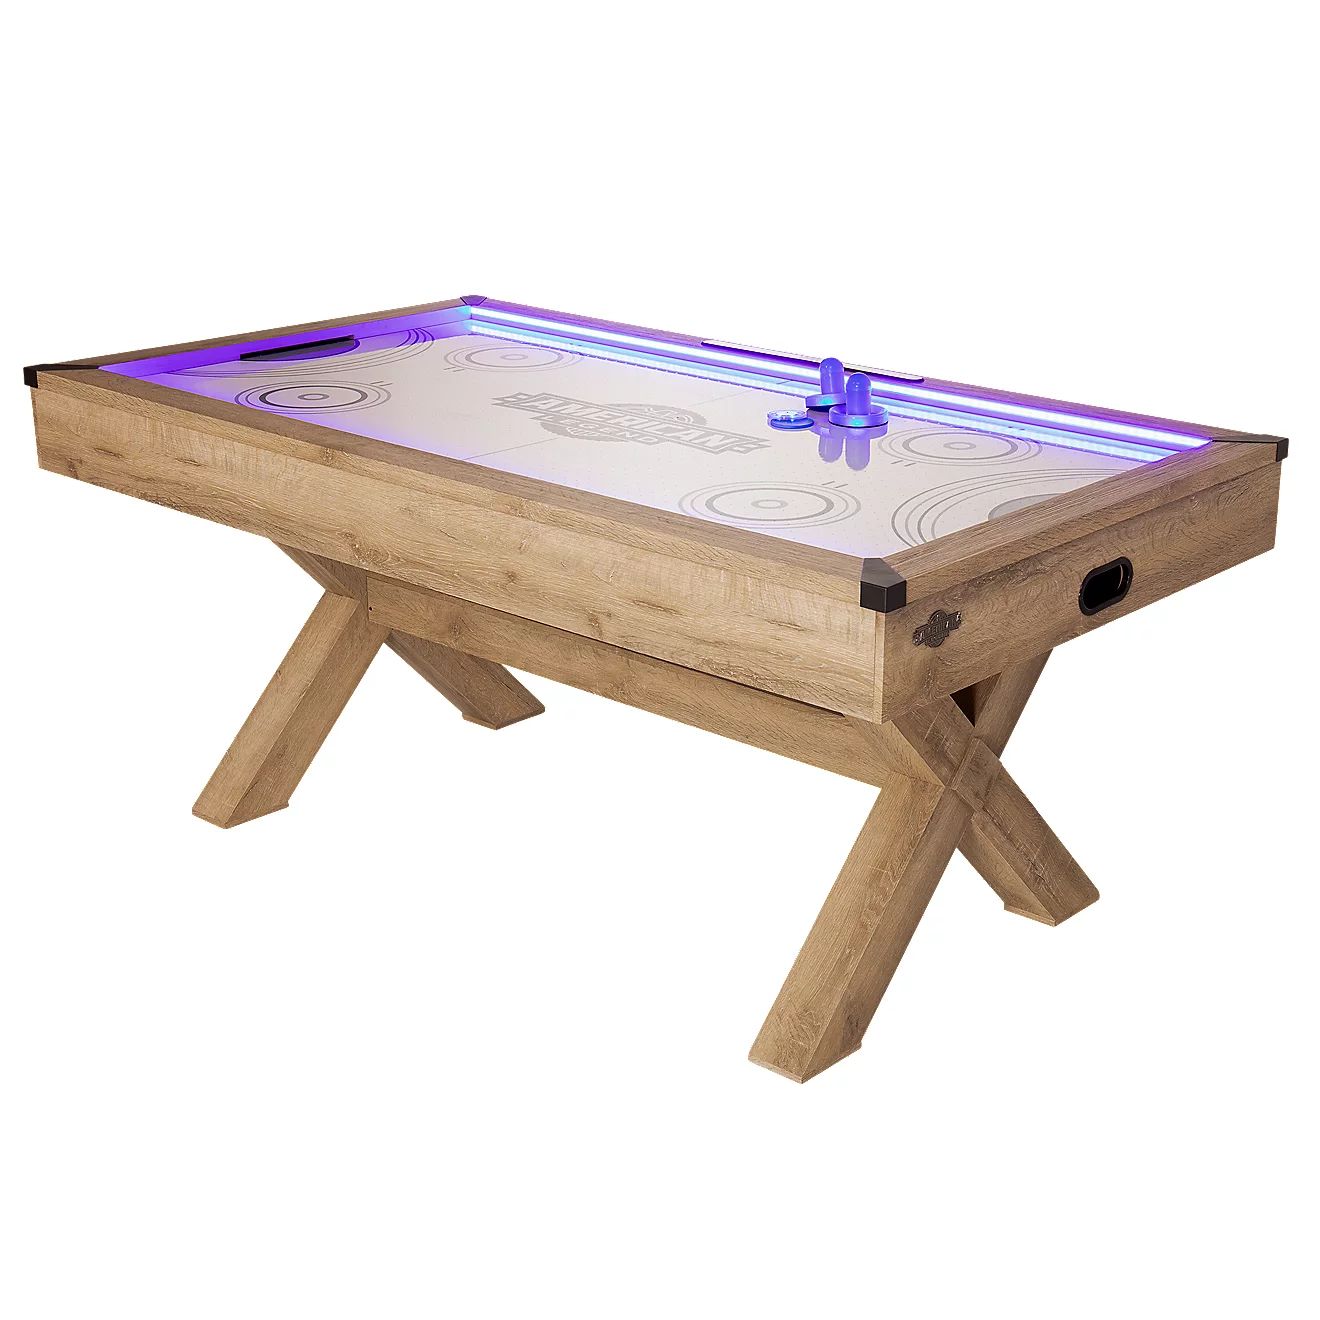 American Legend 72 in LED Westbrook Air Hockey Table | Academy | Academy Sports + Outdoors